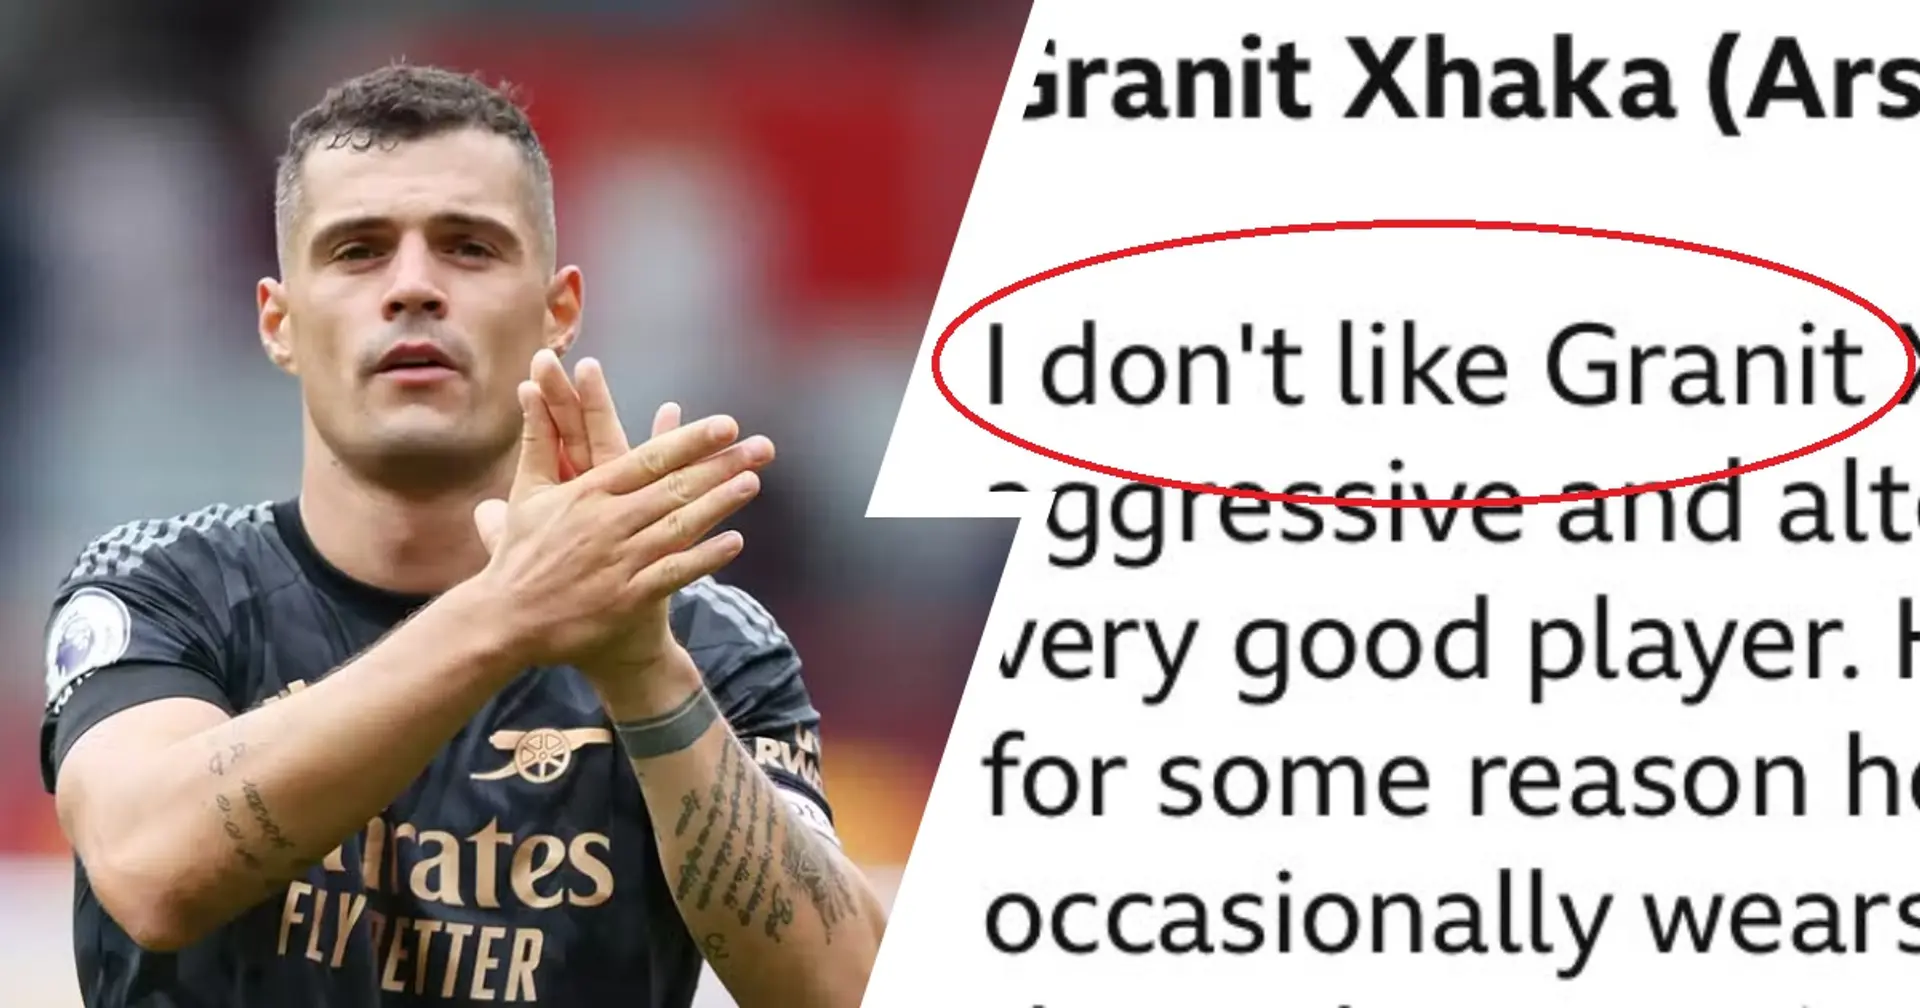 'An absolutely mental agenda': Arsenal fans react as BBC include Xhaka in Team of the Week — and call him 'altogether irritating'